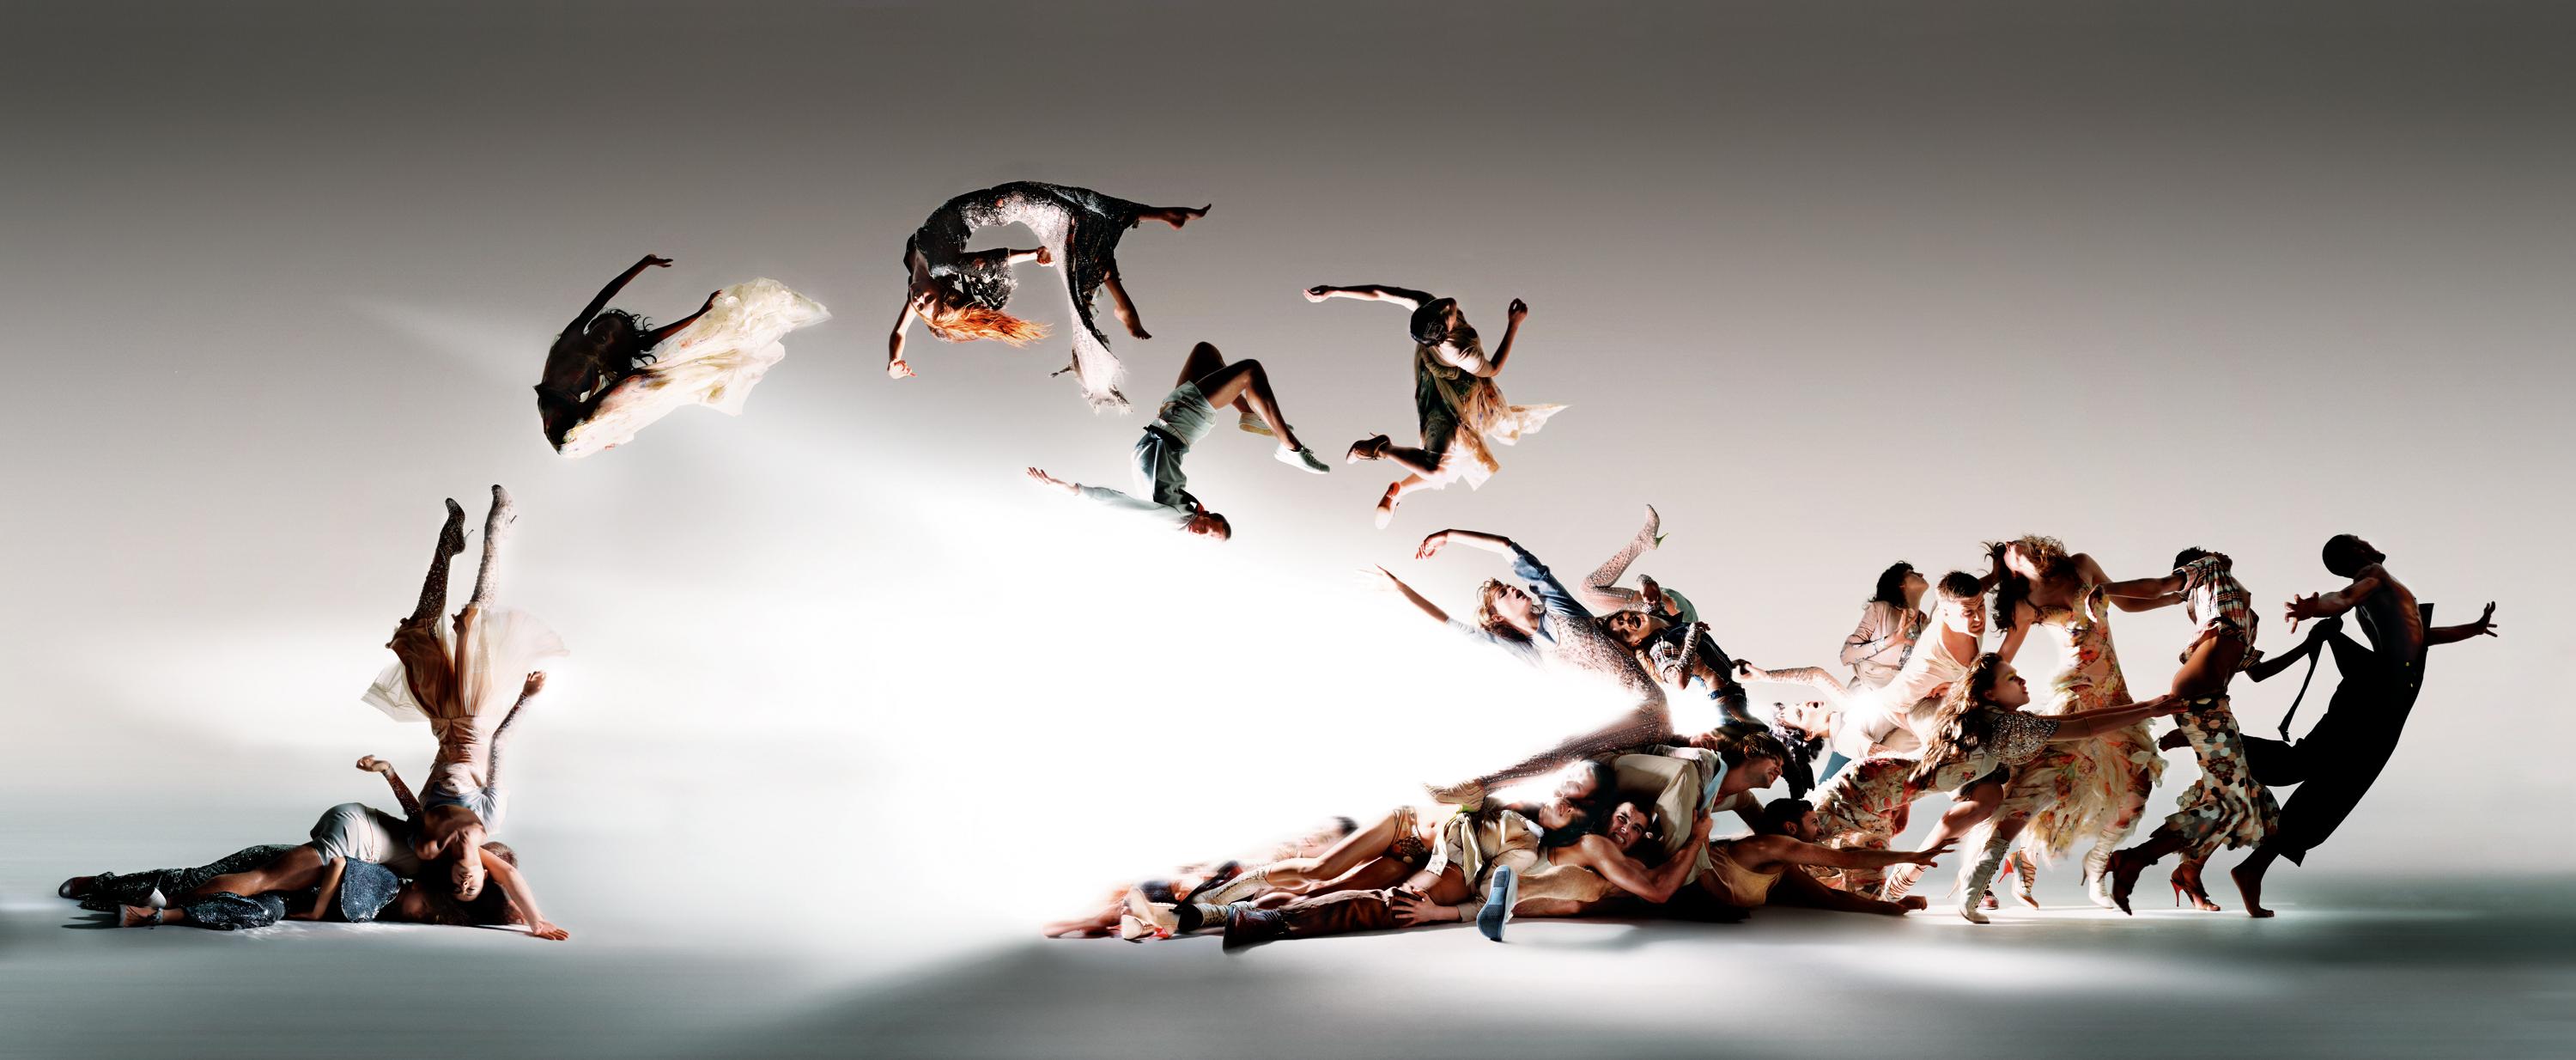 Nick Knight Color Photograph - Blade of Light for Alexander McQueen – Art, Photography, Photographs